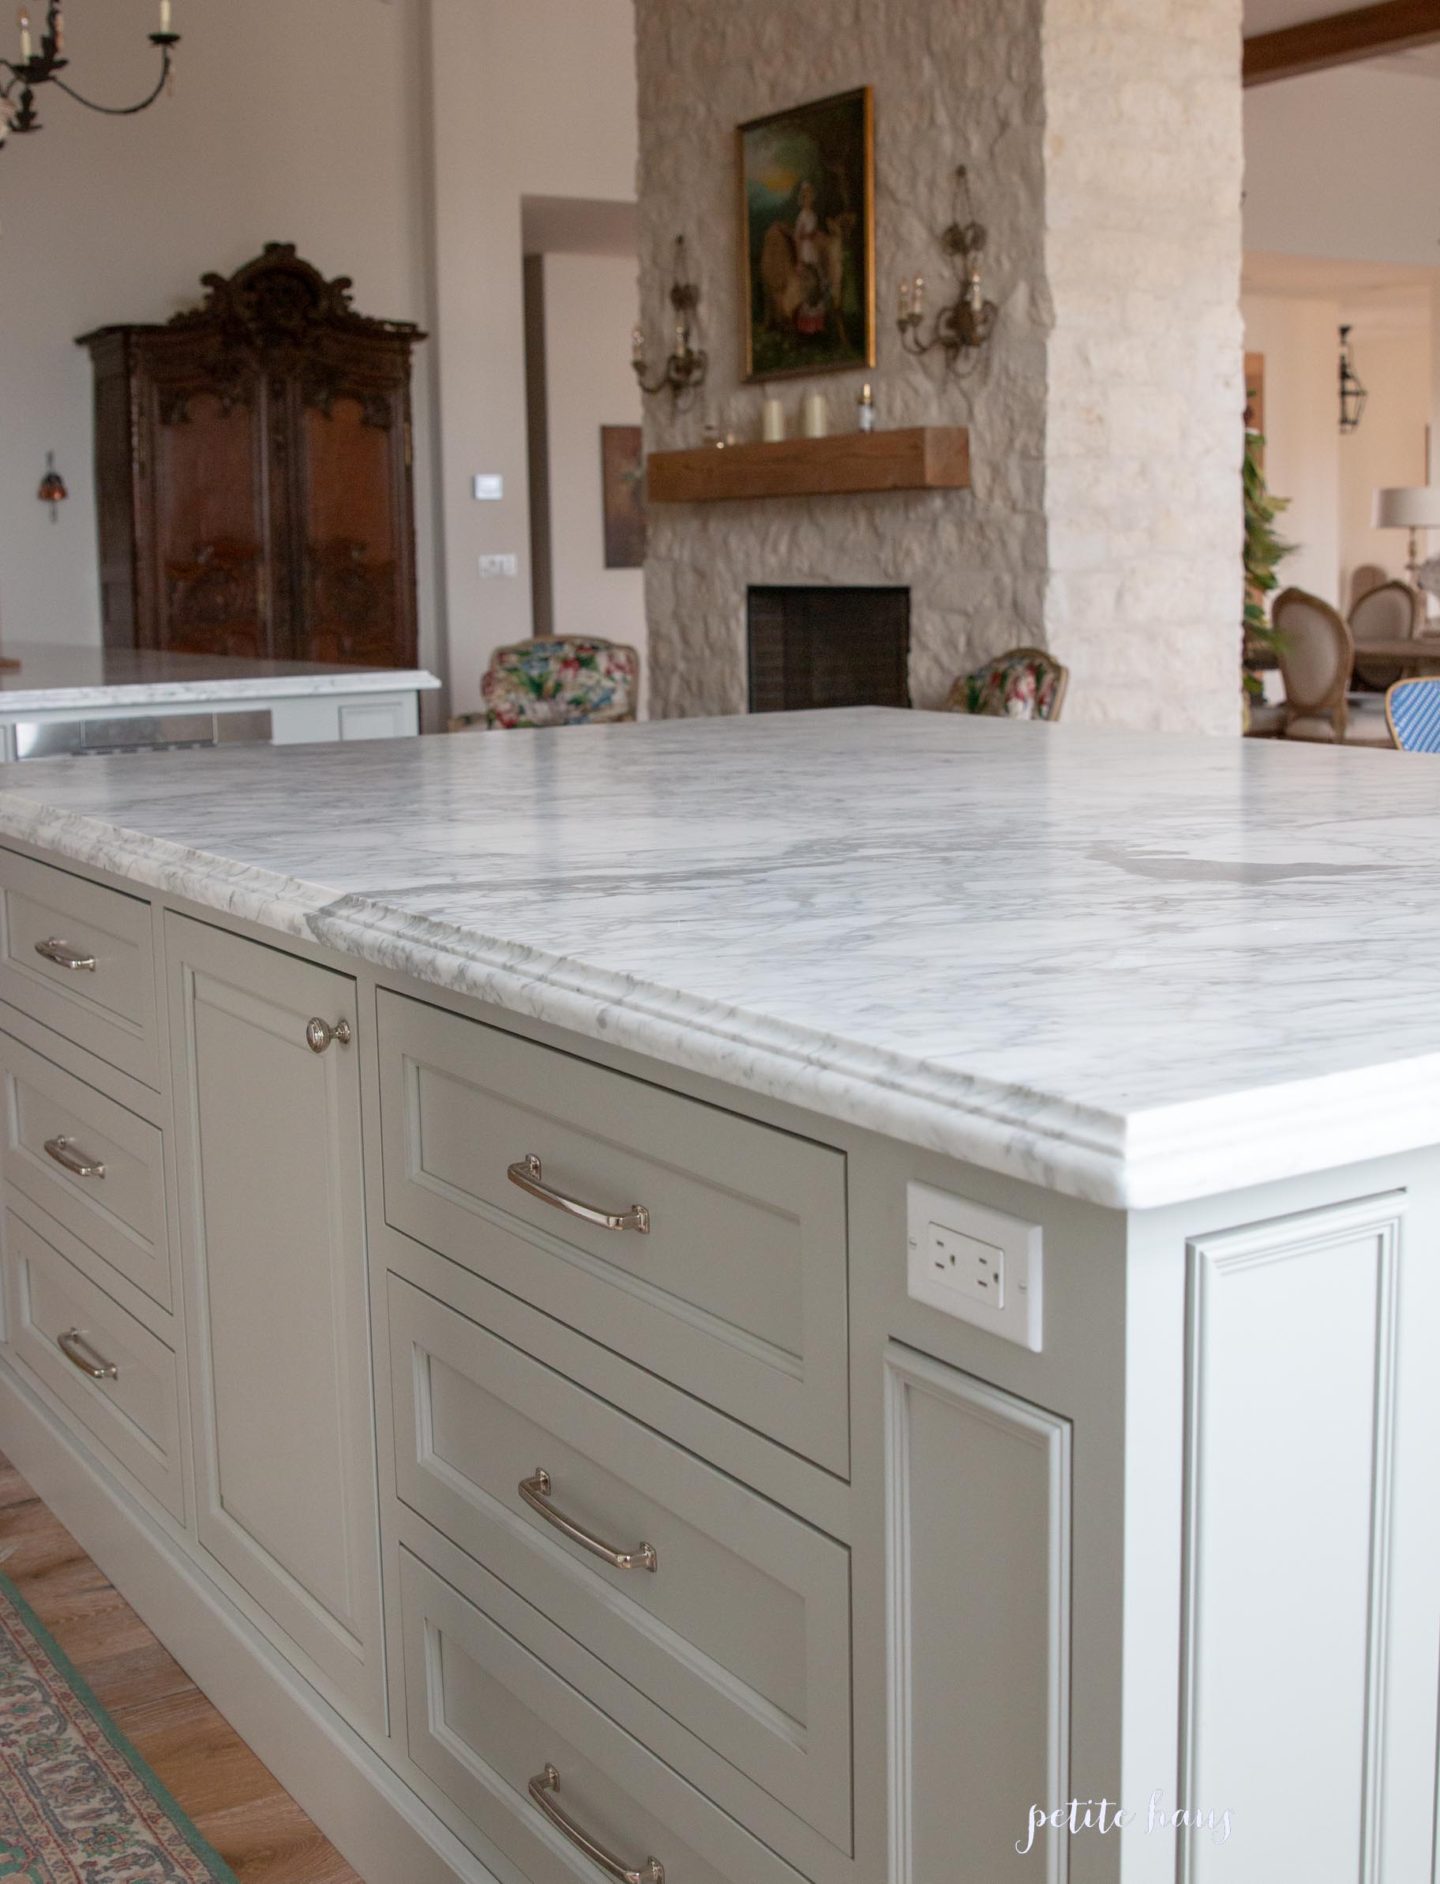 Why I love my marble countertops in the kitchen - Petite Haus